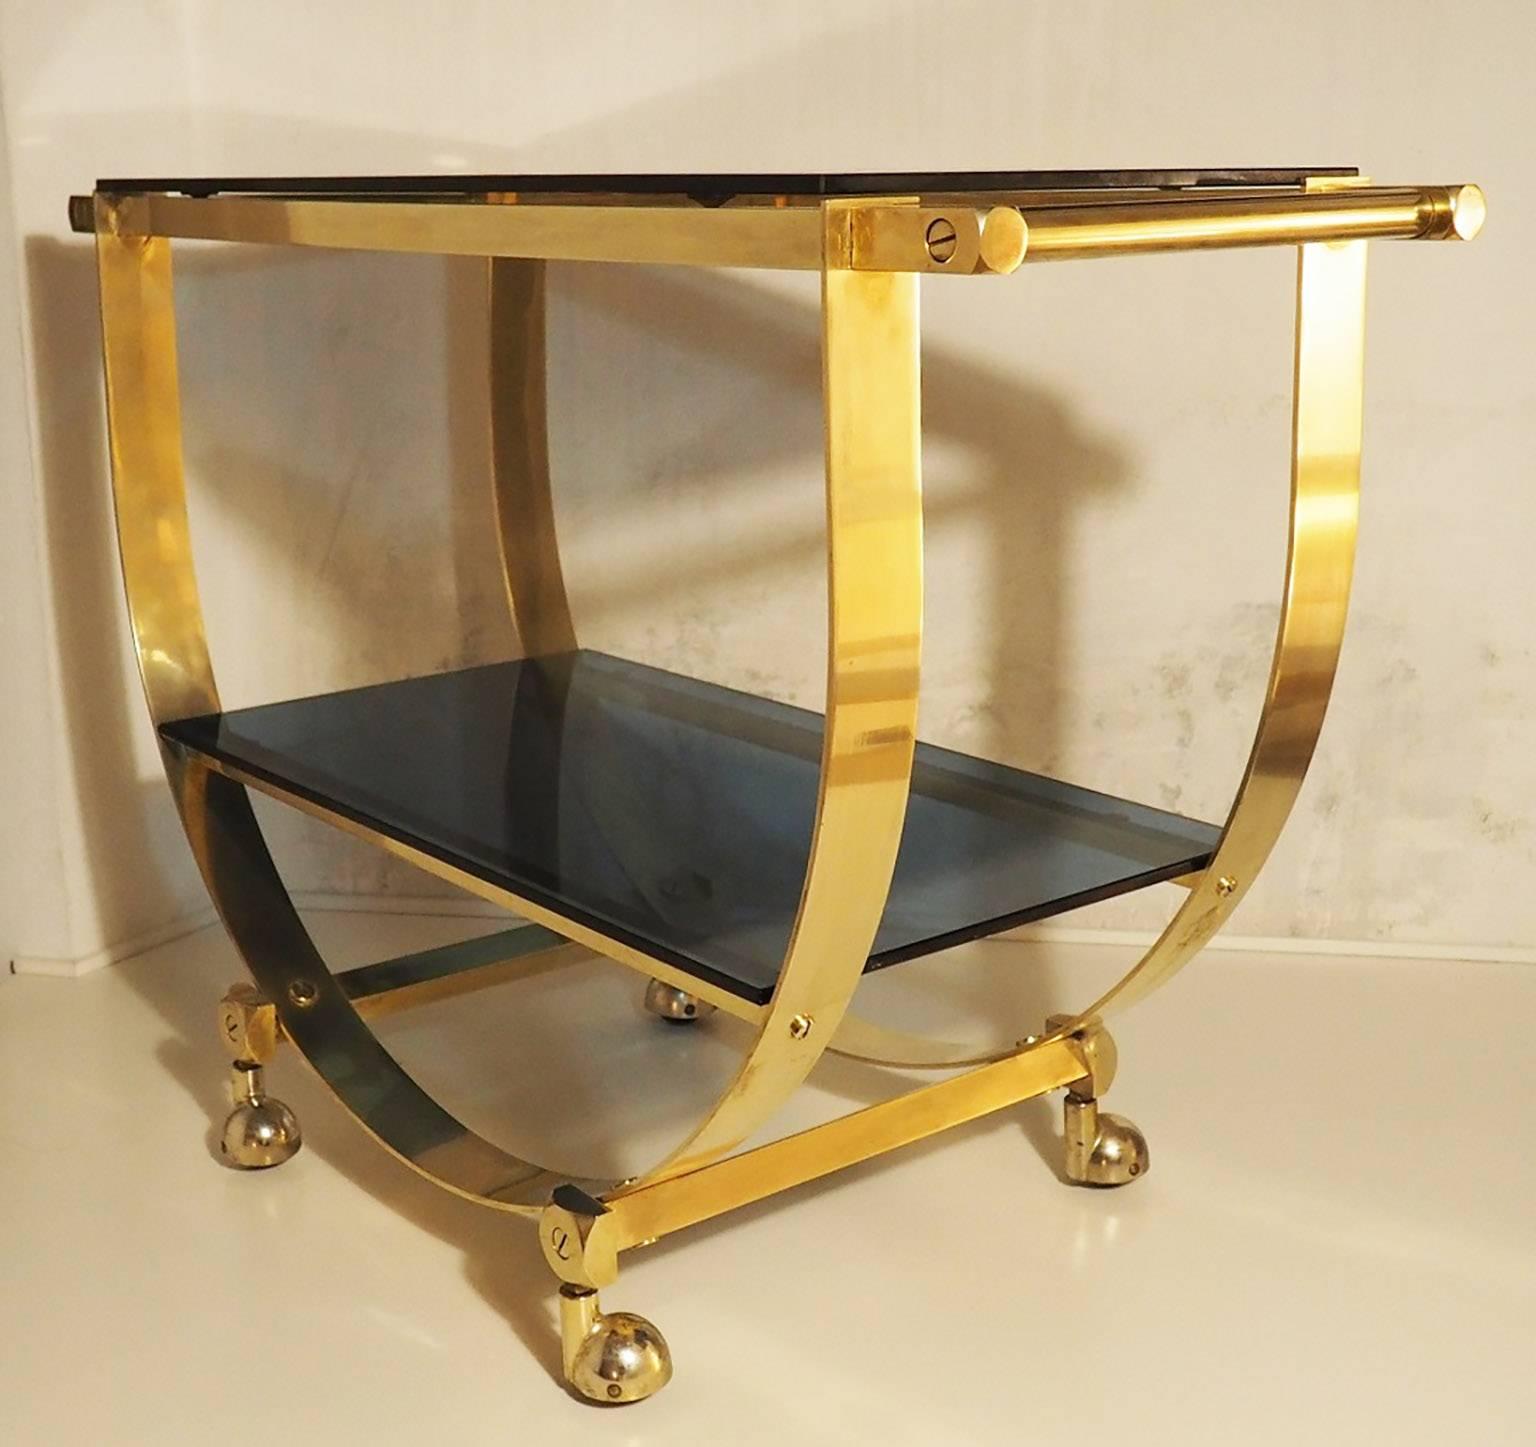 Glamorous table cart with nice brass structure and two blue glass shelves; a fine and functional design conceived and designed also to be easily removable. The two original blue shelves are in thickness glass; the quality of manufacture can be